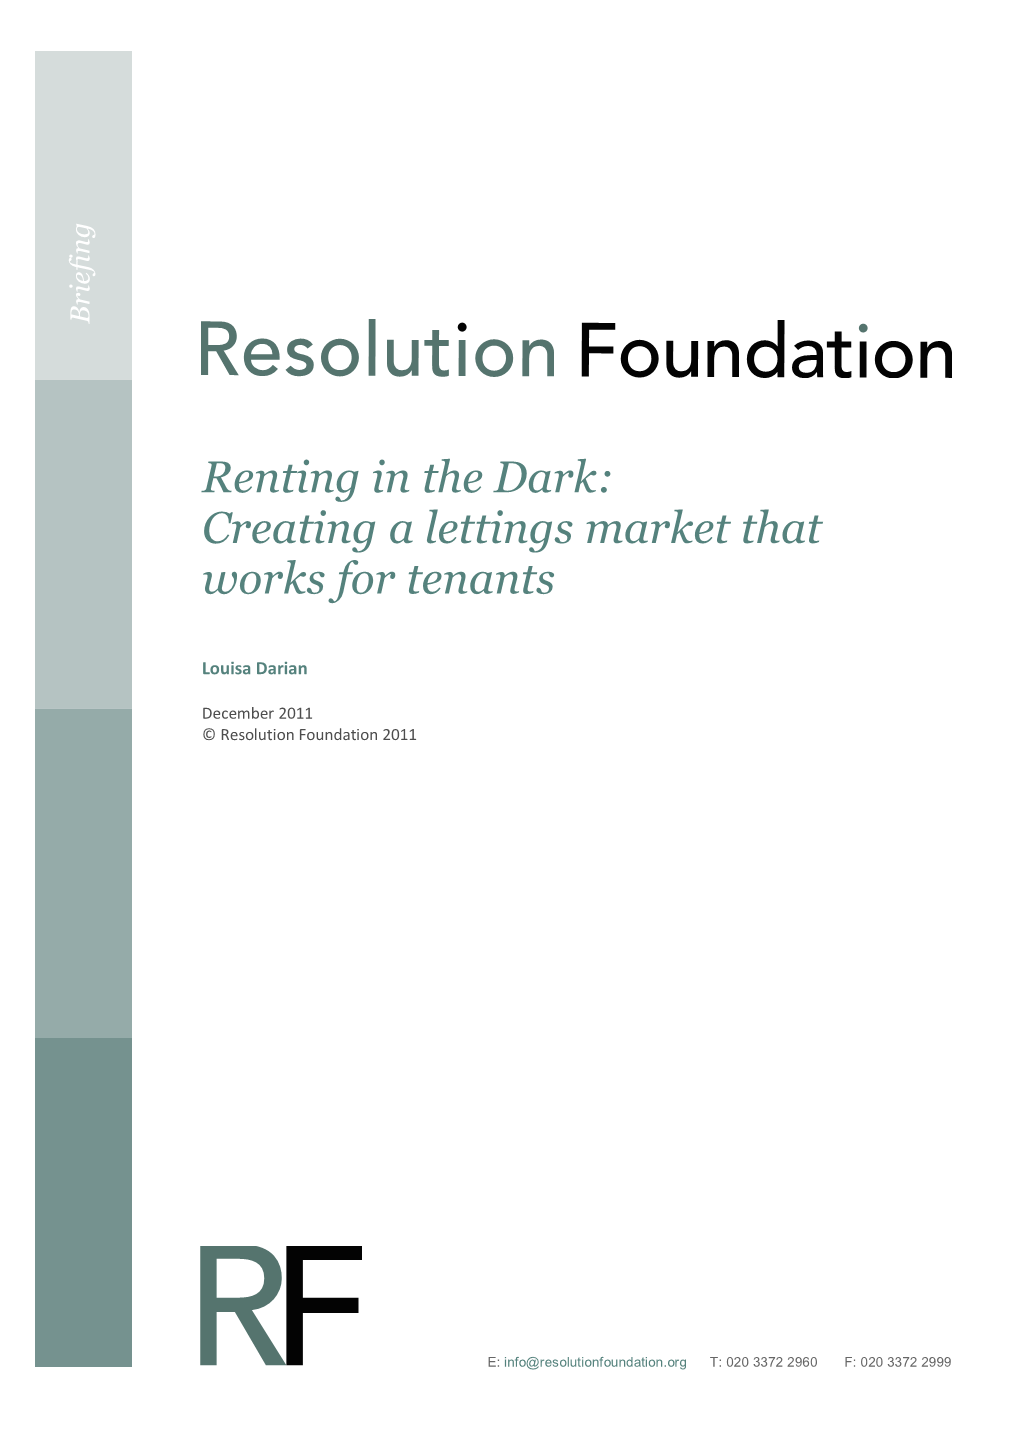 Renting in the Dark: Creating a Lettings Market That Works for Tenants